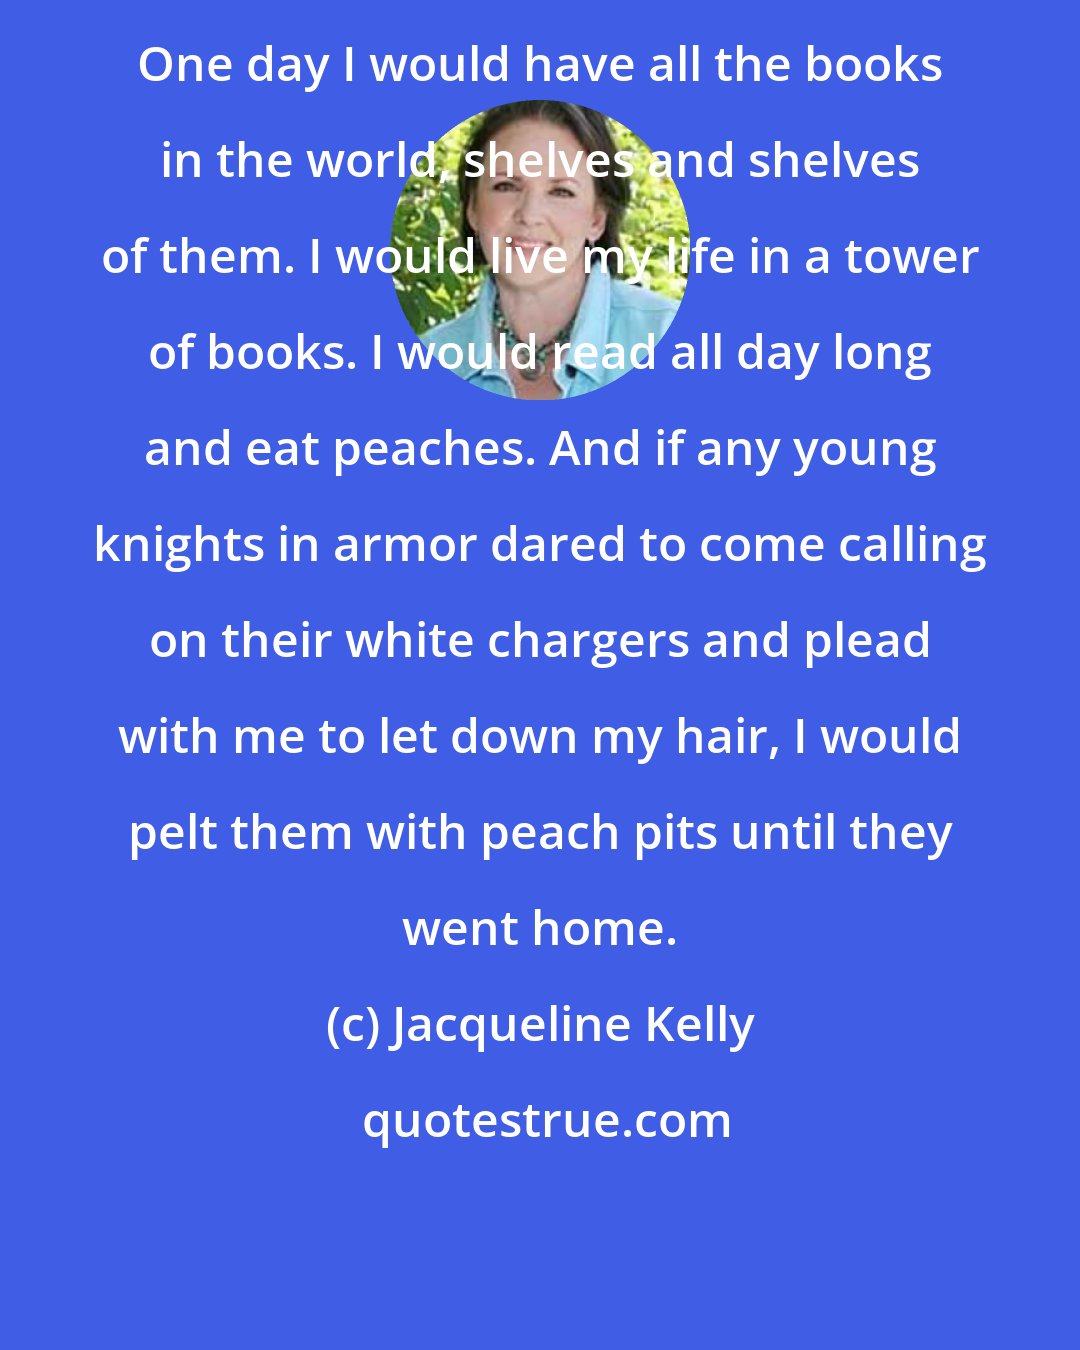 Jacqueline Kelly: One day I would have all the books in the world, shelves and shelves of them. I would live my life in a tower of books. I would read all day long and eat peaches. And if any young knights in armor dared to come calling on their white chargers and plead with me to let down my hair, I would pelt them with peach pits until they went home.